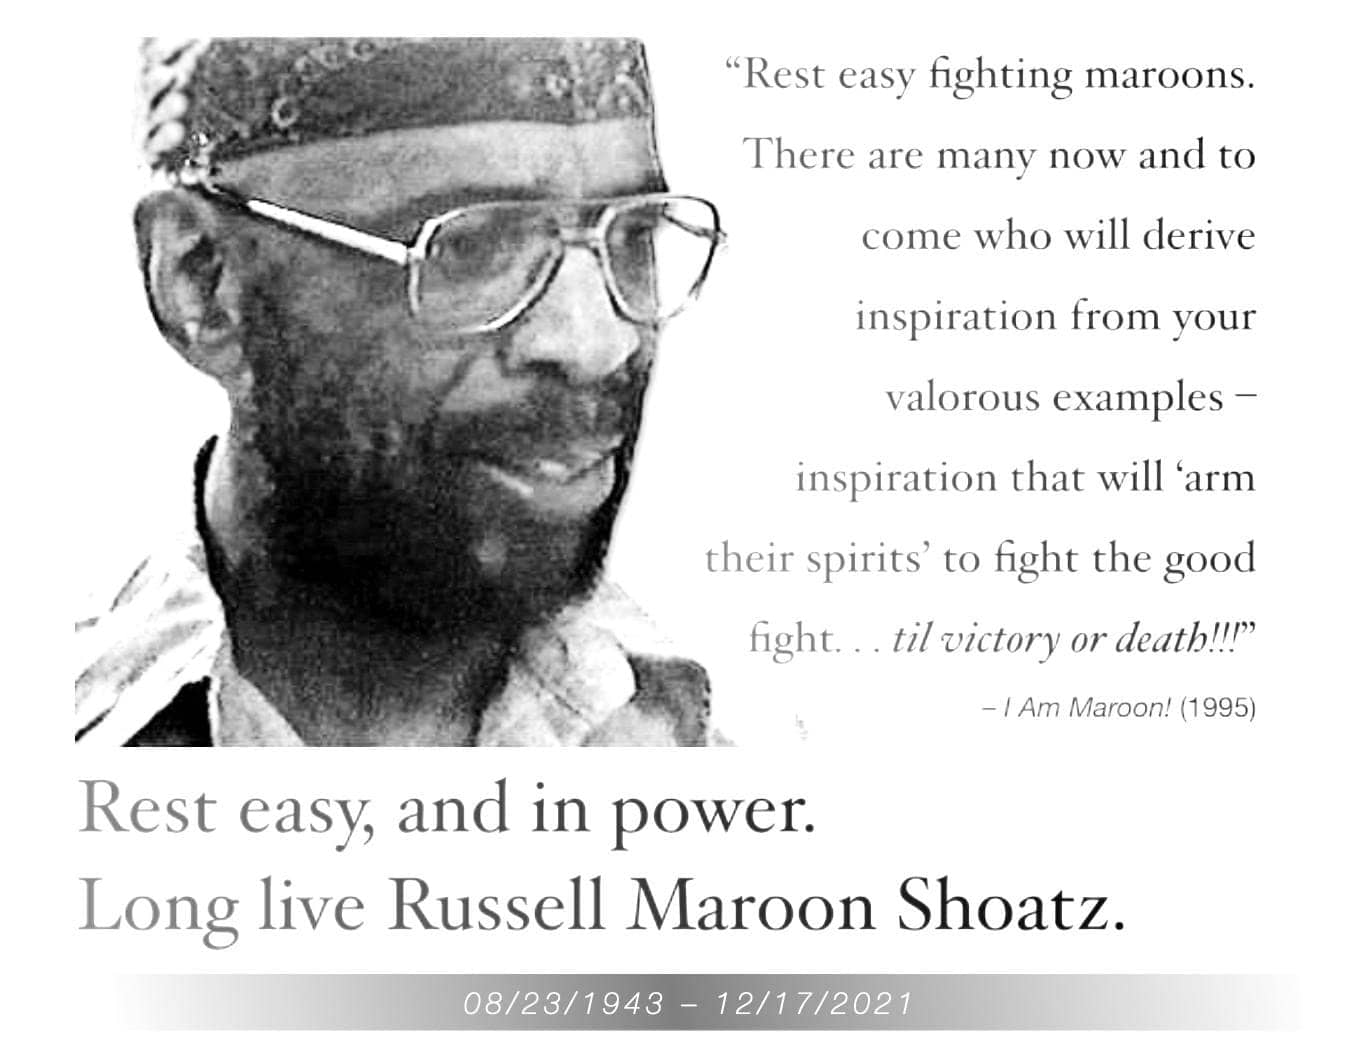 Rest-easy-fighting-maroonsl-Long-live-Russell-Maroon-Shoatz.-meme, Maroon, The Implacable One, Culture Currents 